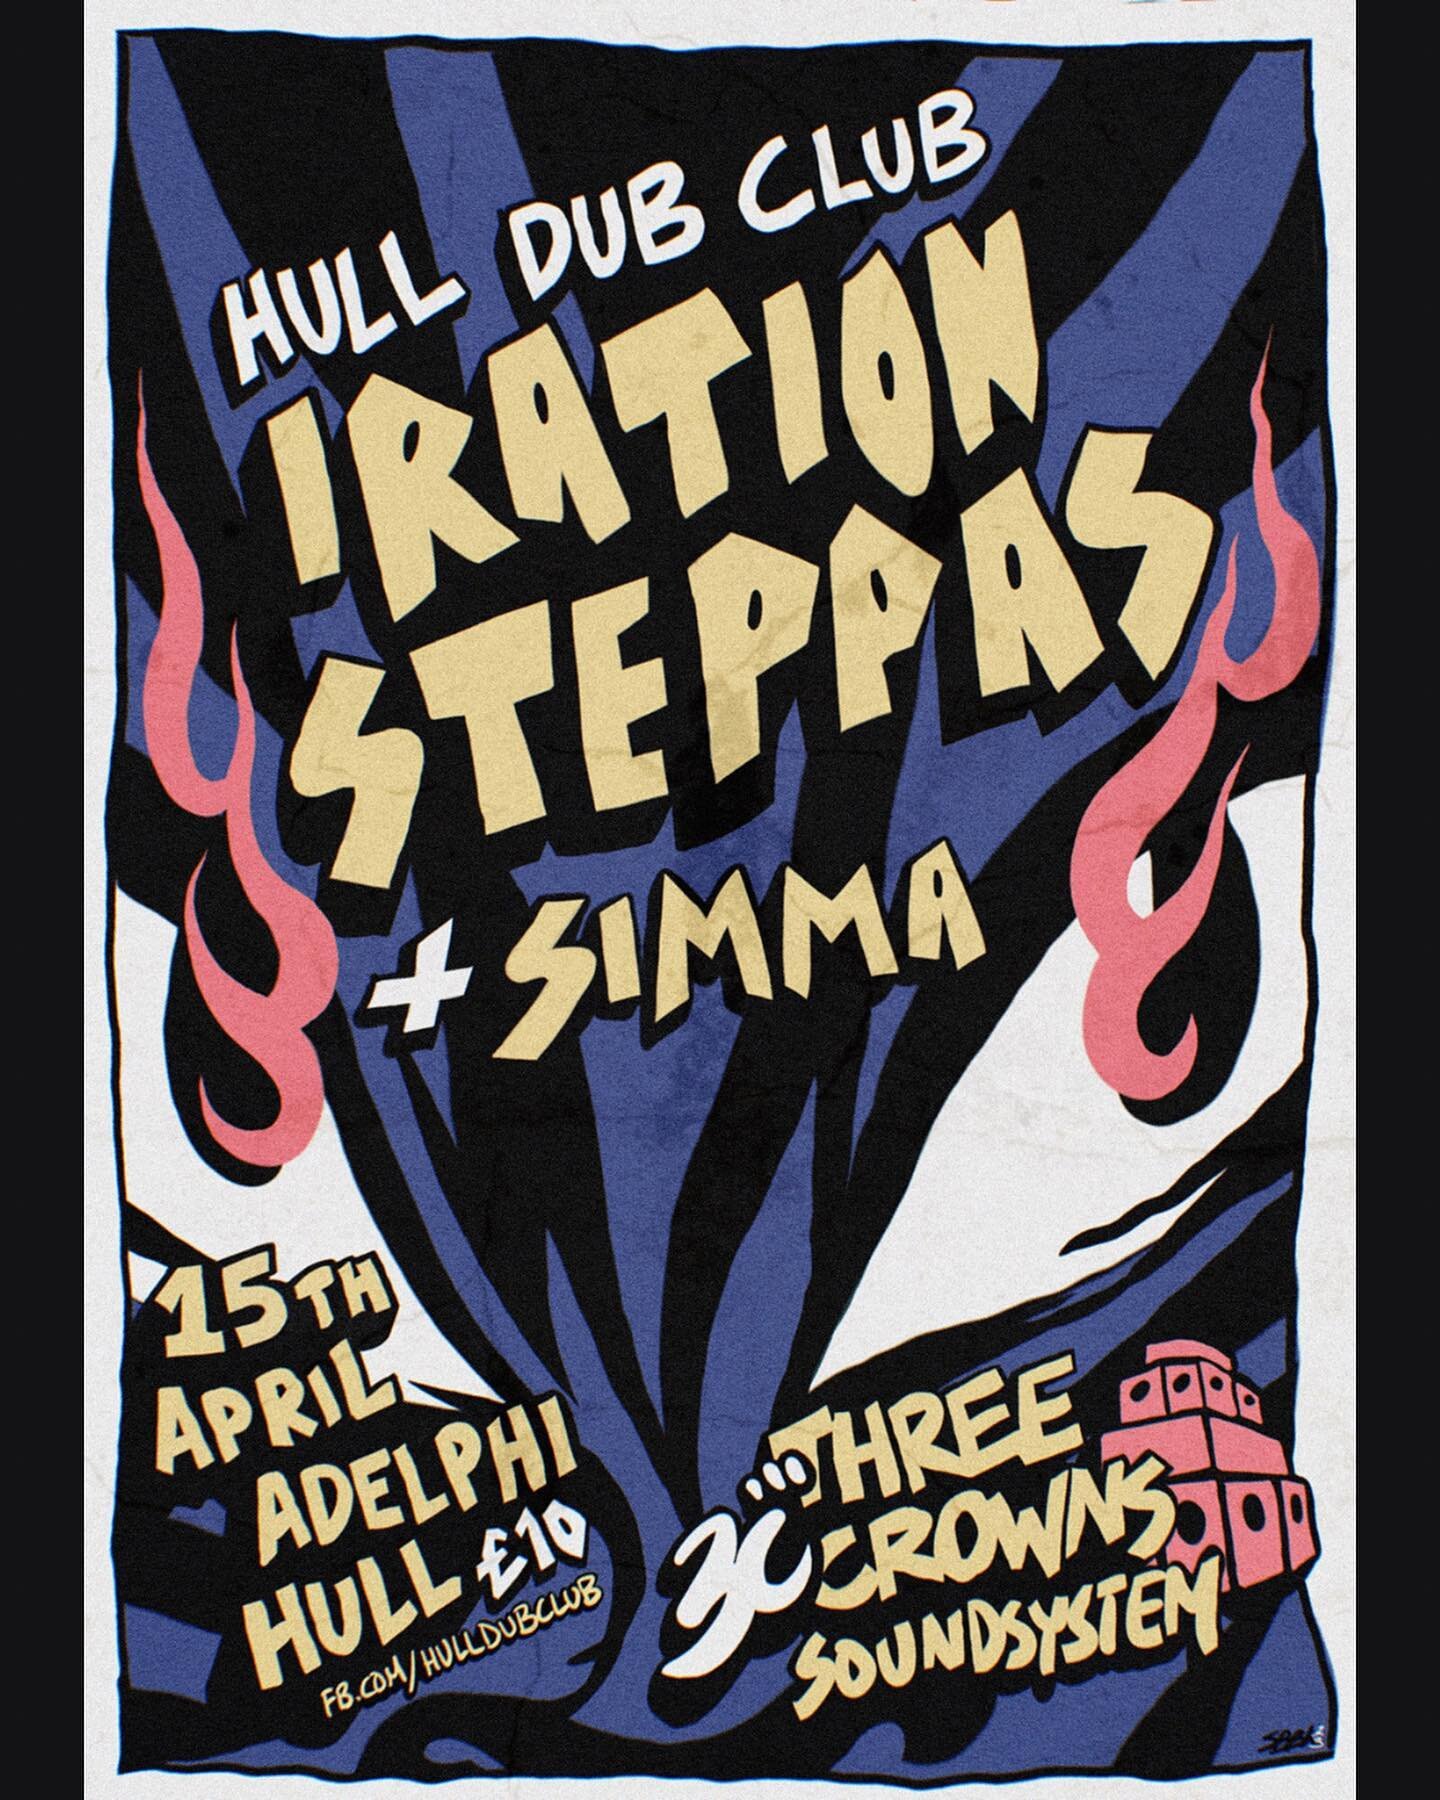 Iration Steppas play Hull Dub Club!

Coming 15th April 2023, with warm up selection from @simmadub and powered by @threecrownssound 

Tickets &pound;10 via Skiddle

Art by @sbbkbbsodddoss 

#hulldubclub